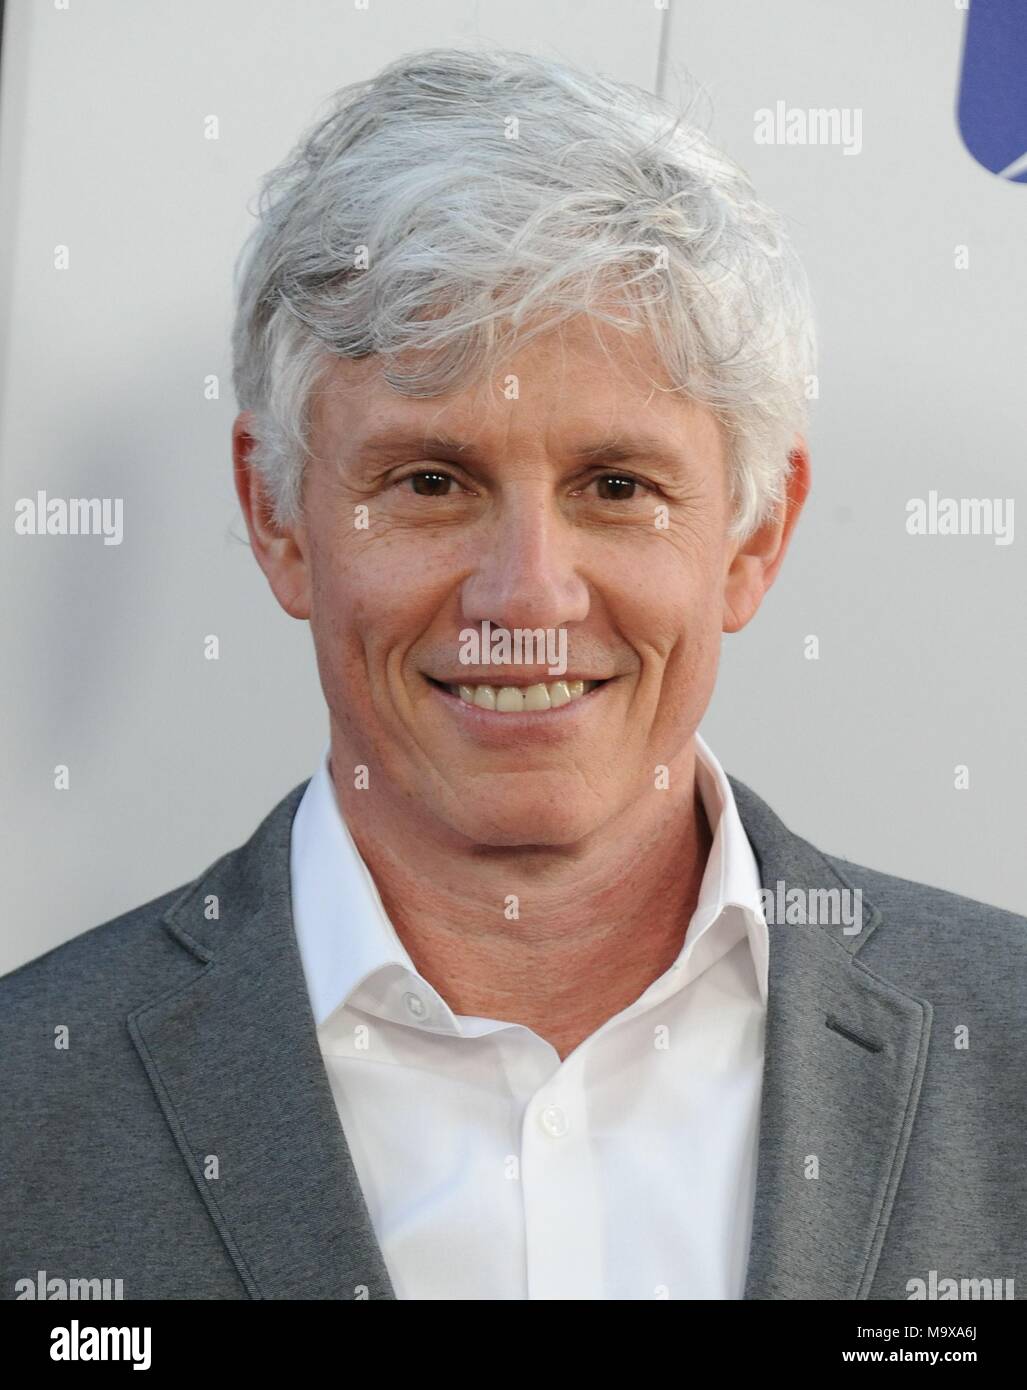 Los Angeles, CA, USA. 28th Mar, 2018. John Curran at arrivals for CHAPPAQUIDDICK Premiere, Samuel Goldwyn Theater, Los Angeles, CA March 28, 2018. Credit: Dee Cercone/Everett Collection/Alamy Live News Stock Photo